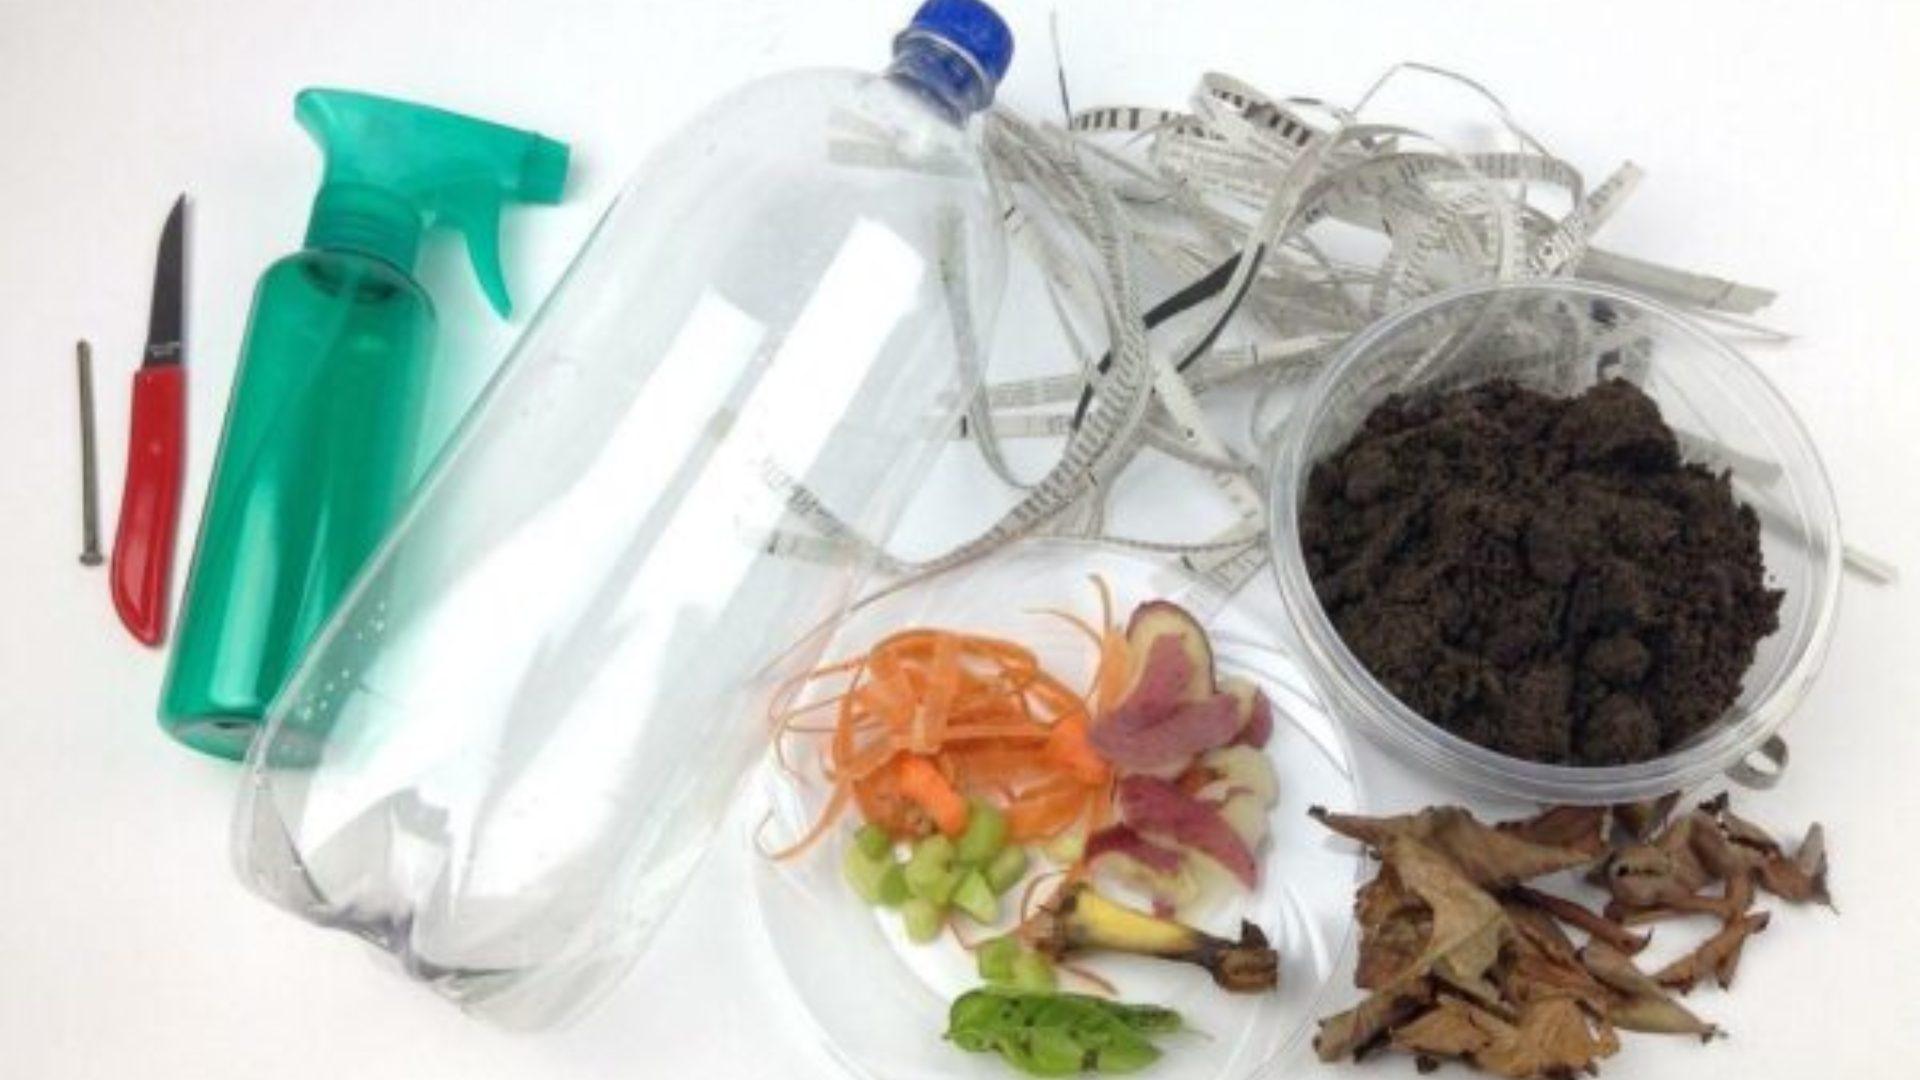 A nail, a small red knife, a plasstic spray bottle, a plastic soda bottle, some scraps of paper, food waste, soil and leaves laid out on a white surface.